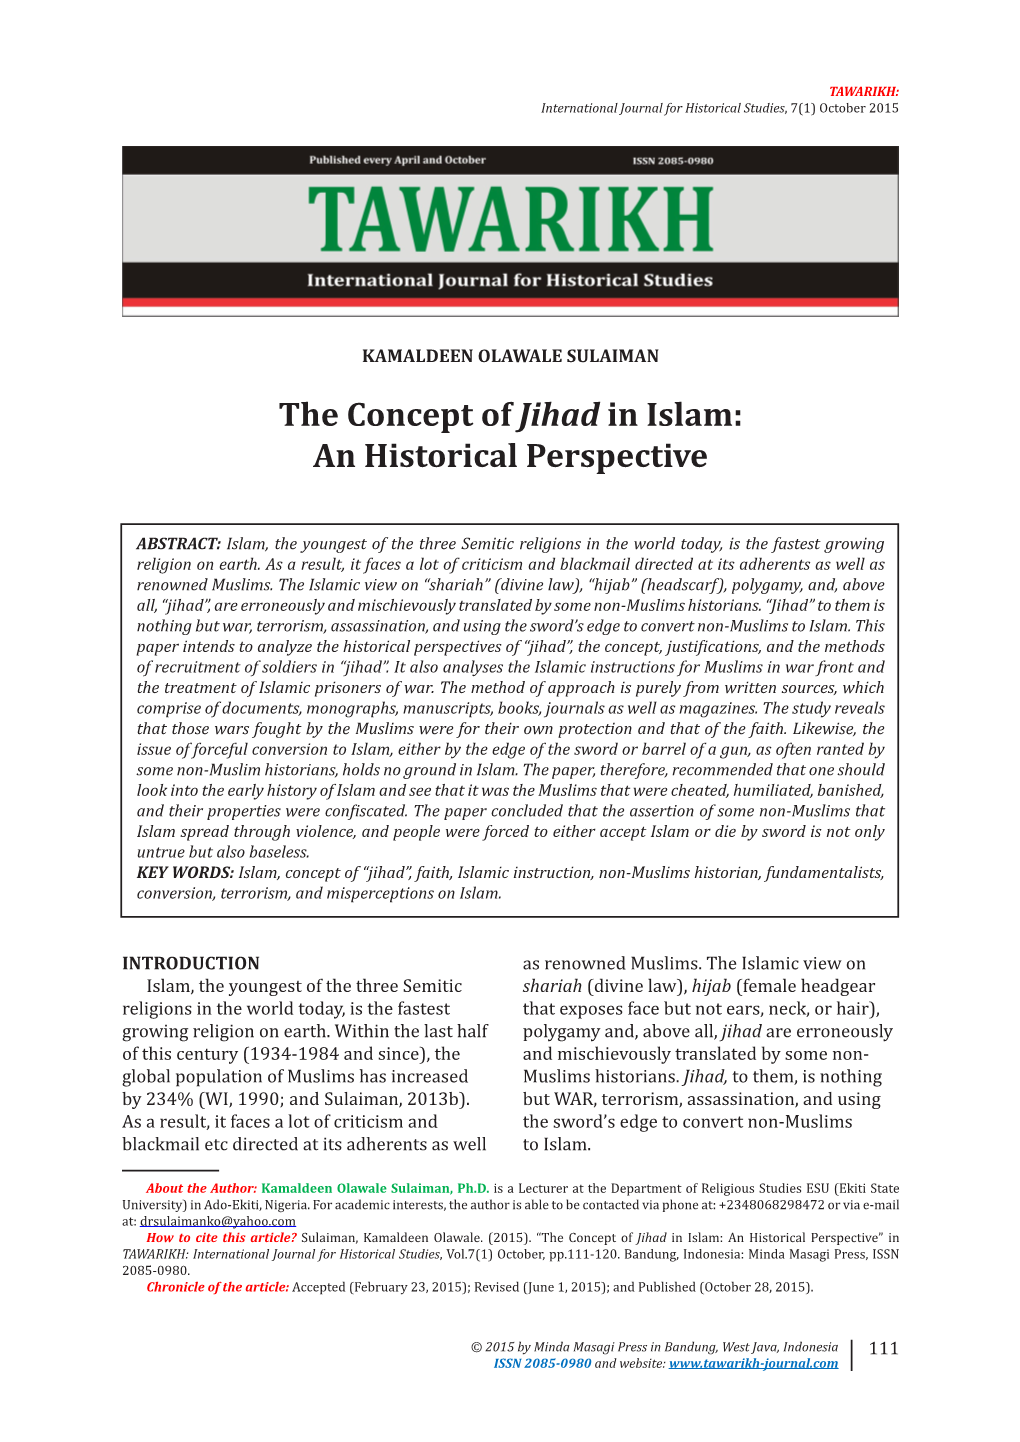 The Concept of Jihad in Islam: an Historical Perspective